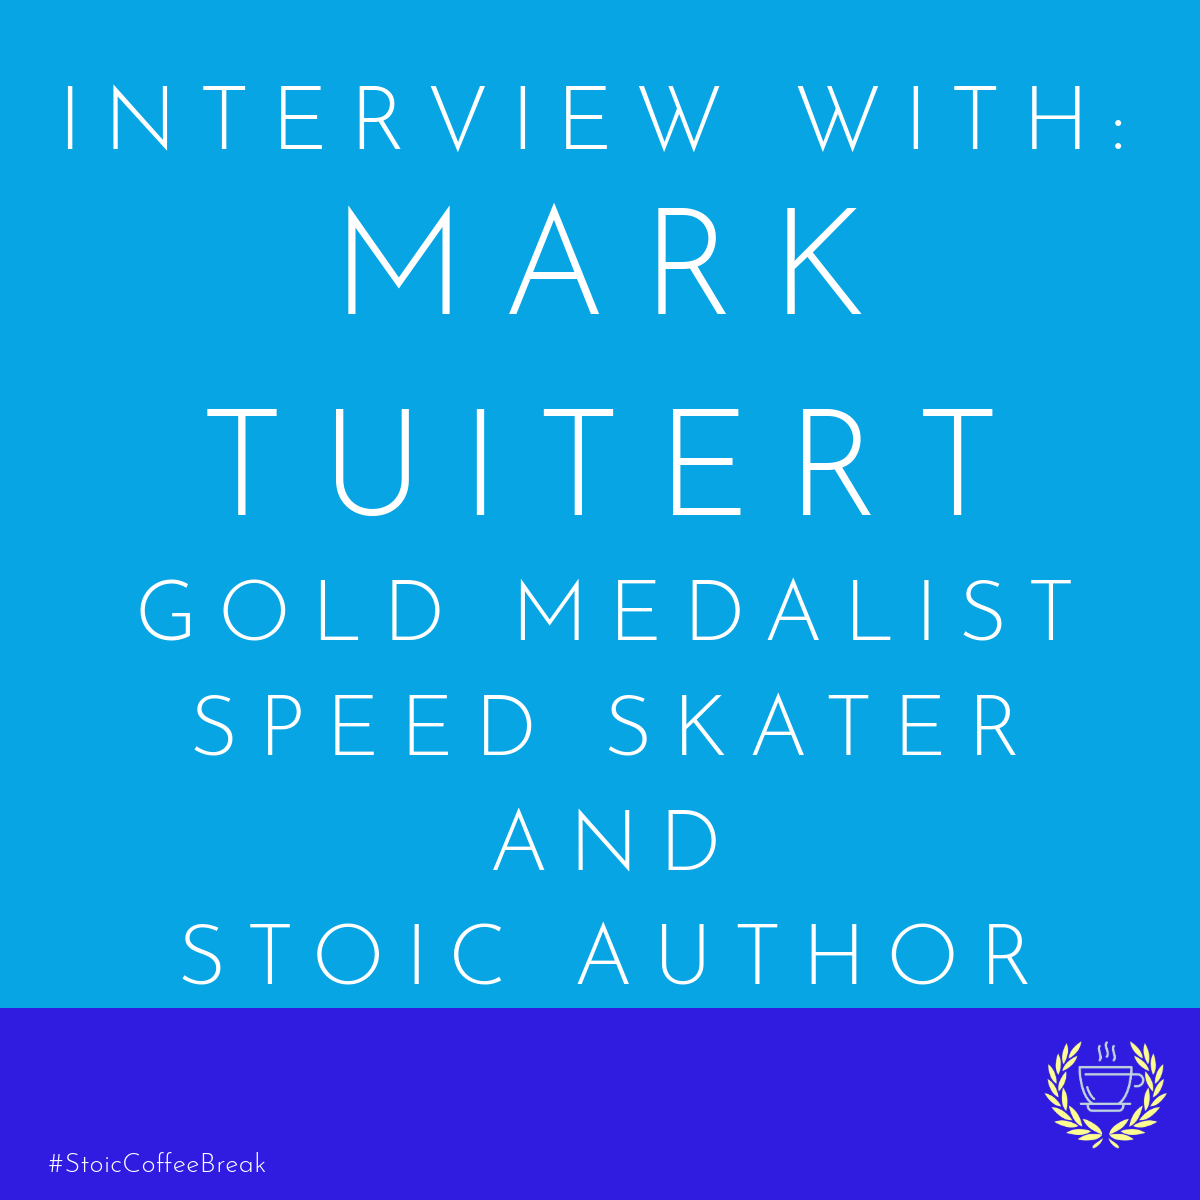 Interview with Mark Tuitert: Olympic Gold Medalist Speed Skater and Stoic Author